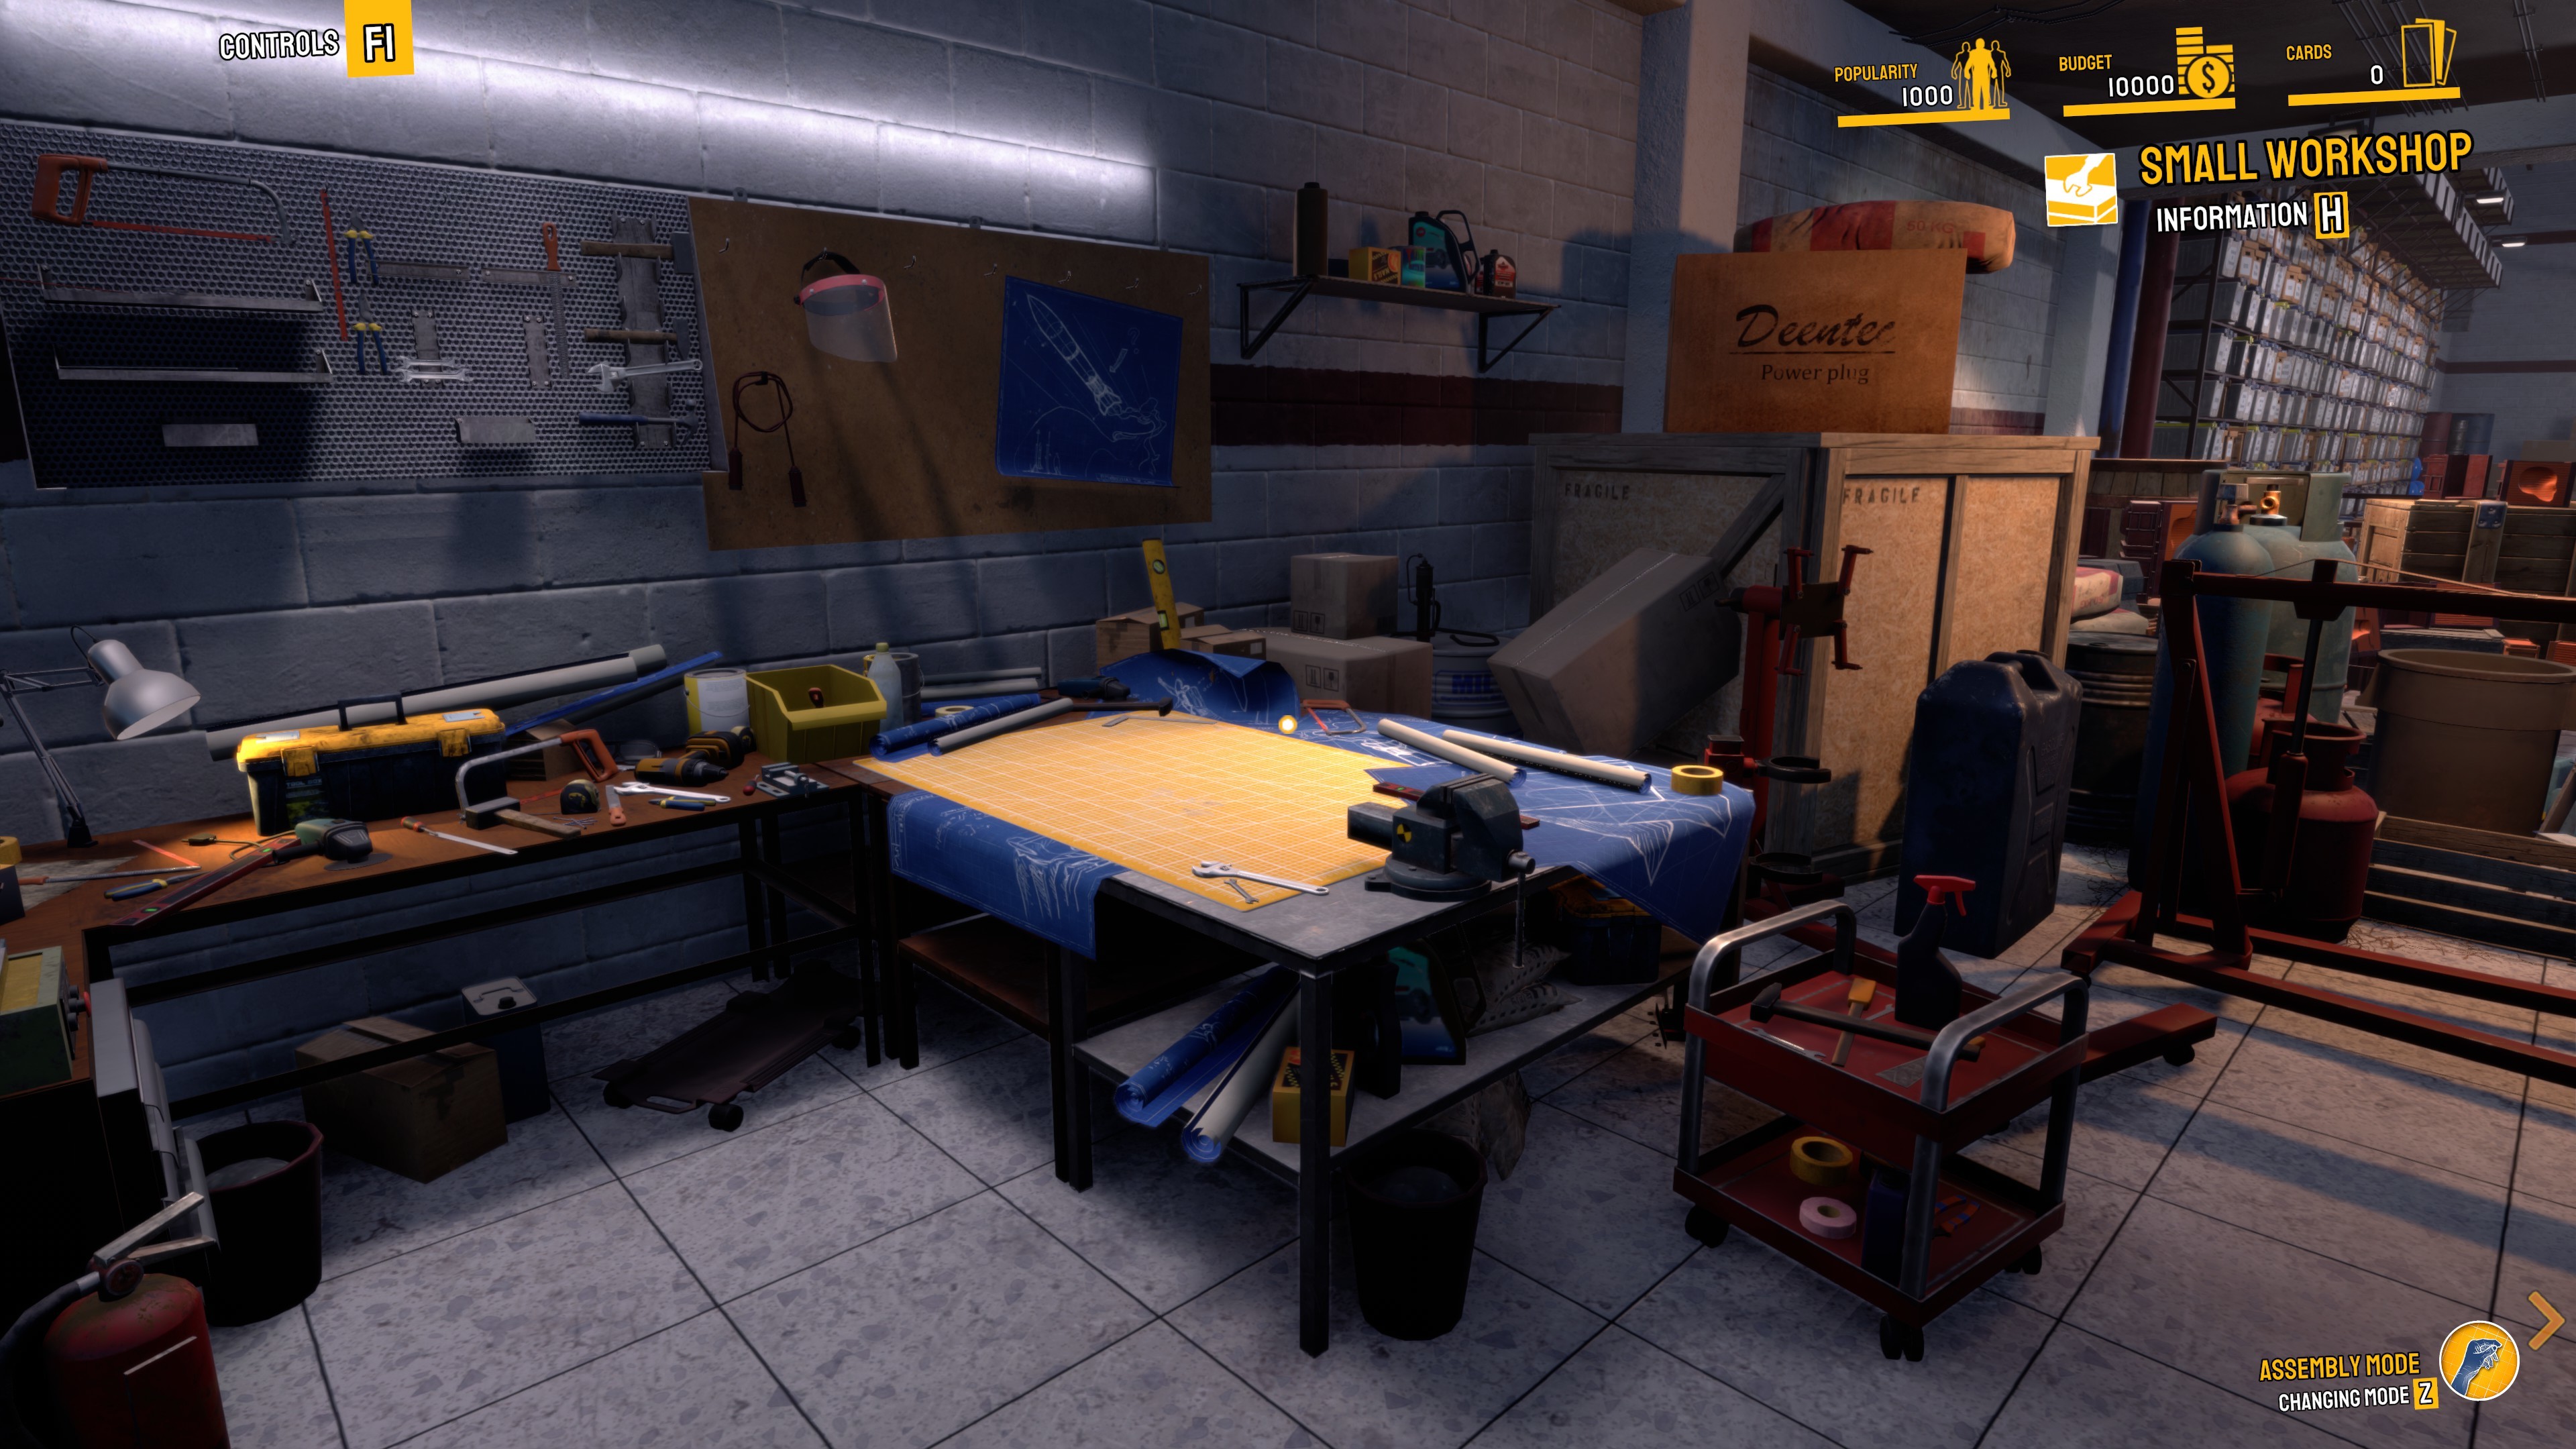 MythBusters: The Game - Crazy Experiments Simulator screenshot